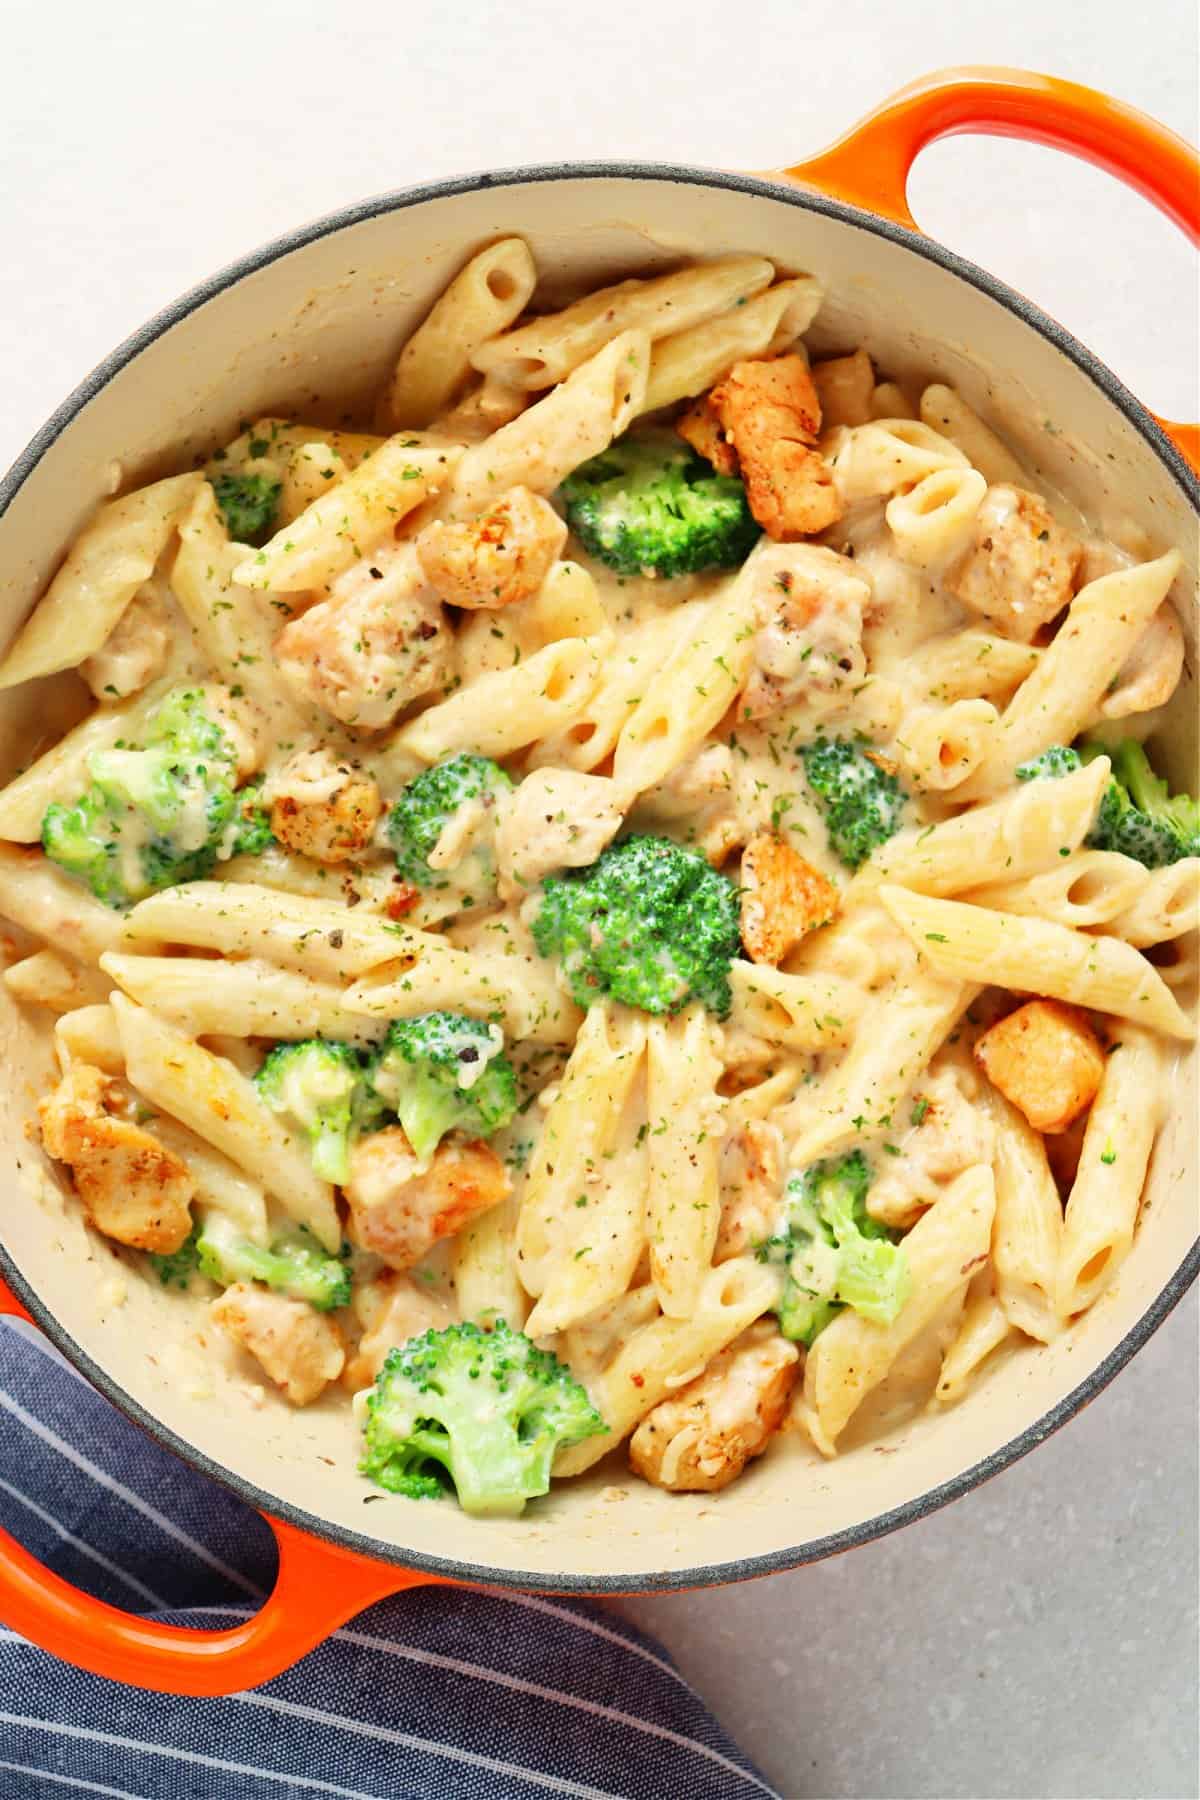 Penne pasta, broccoli and chicken in creamy sauce in an orange Dutch oven.